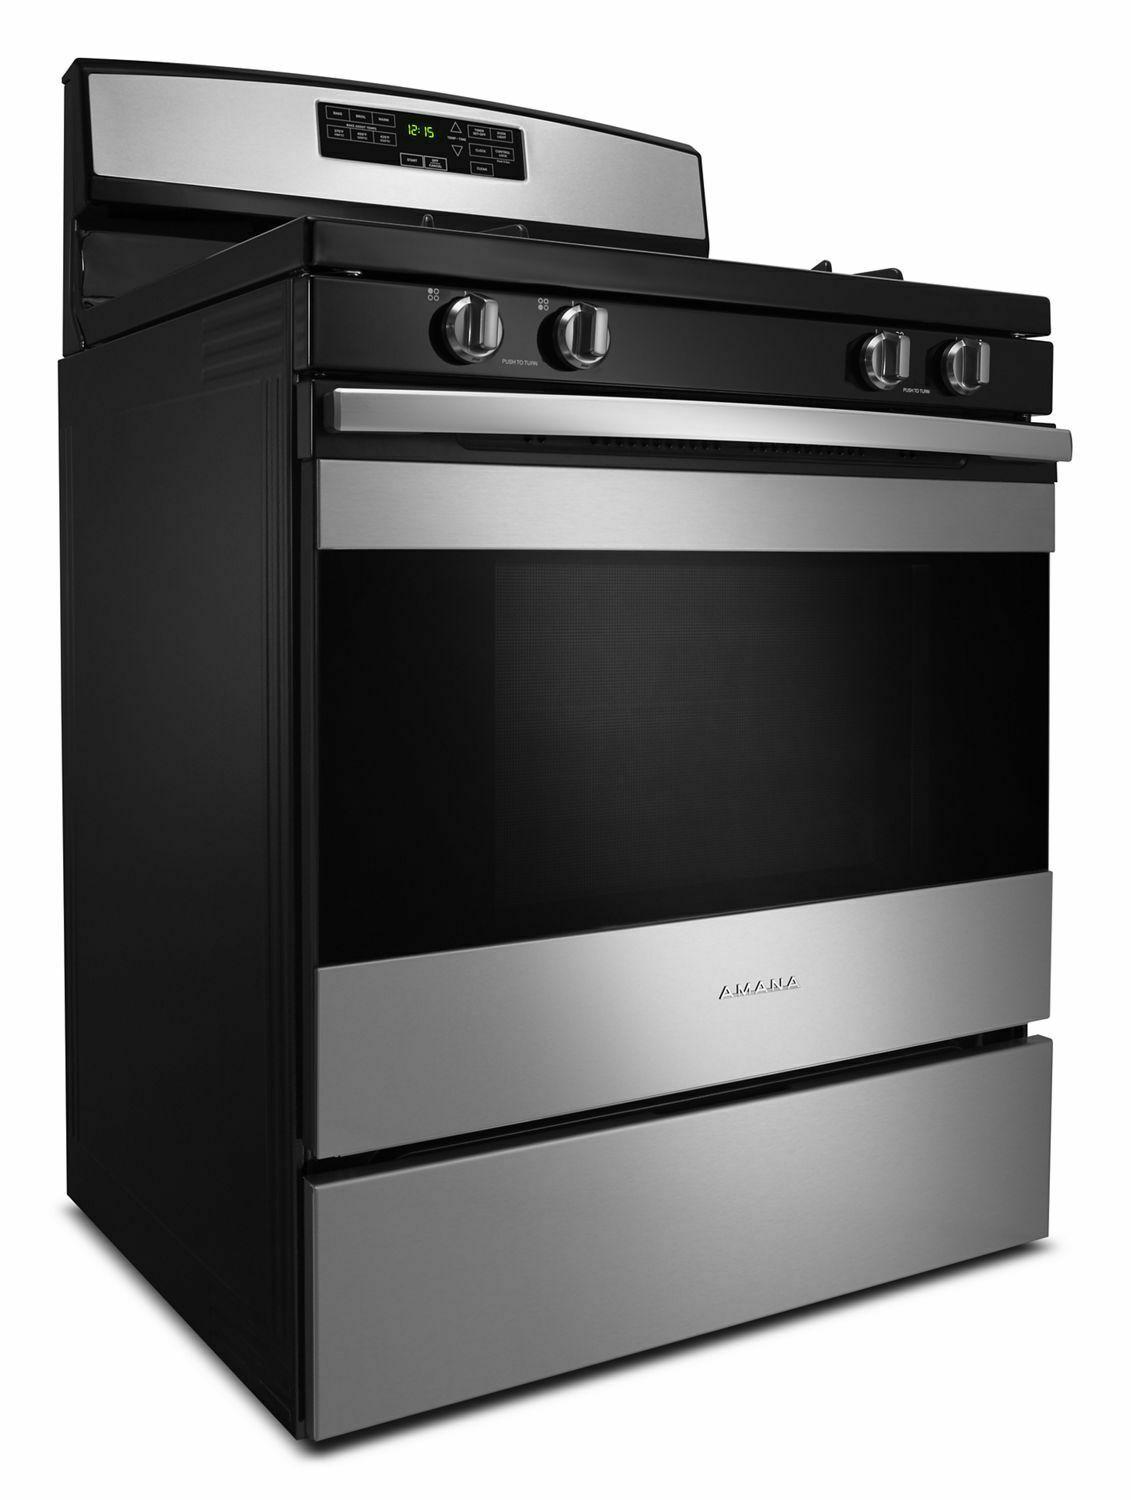 30-inch Gas Range with Self-Clean Option - Stainless Steel